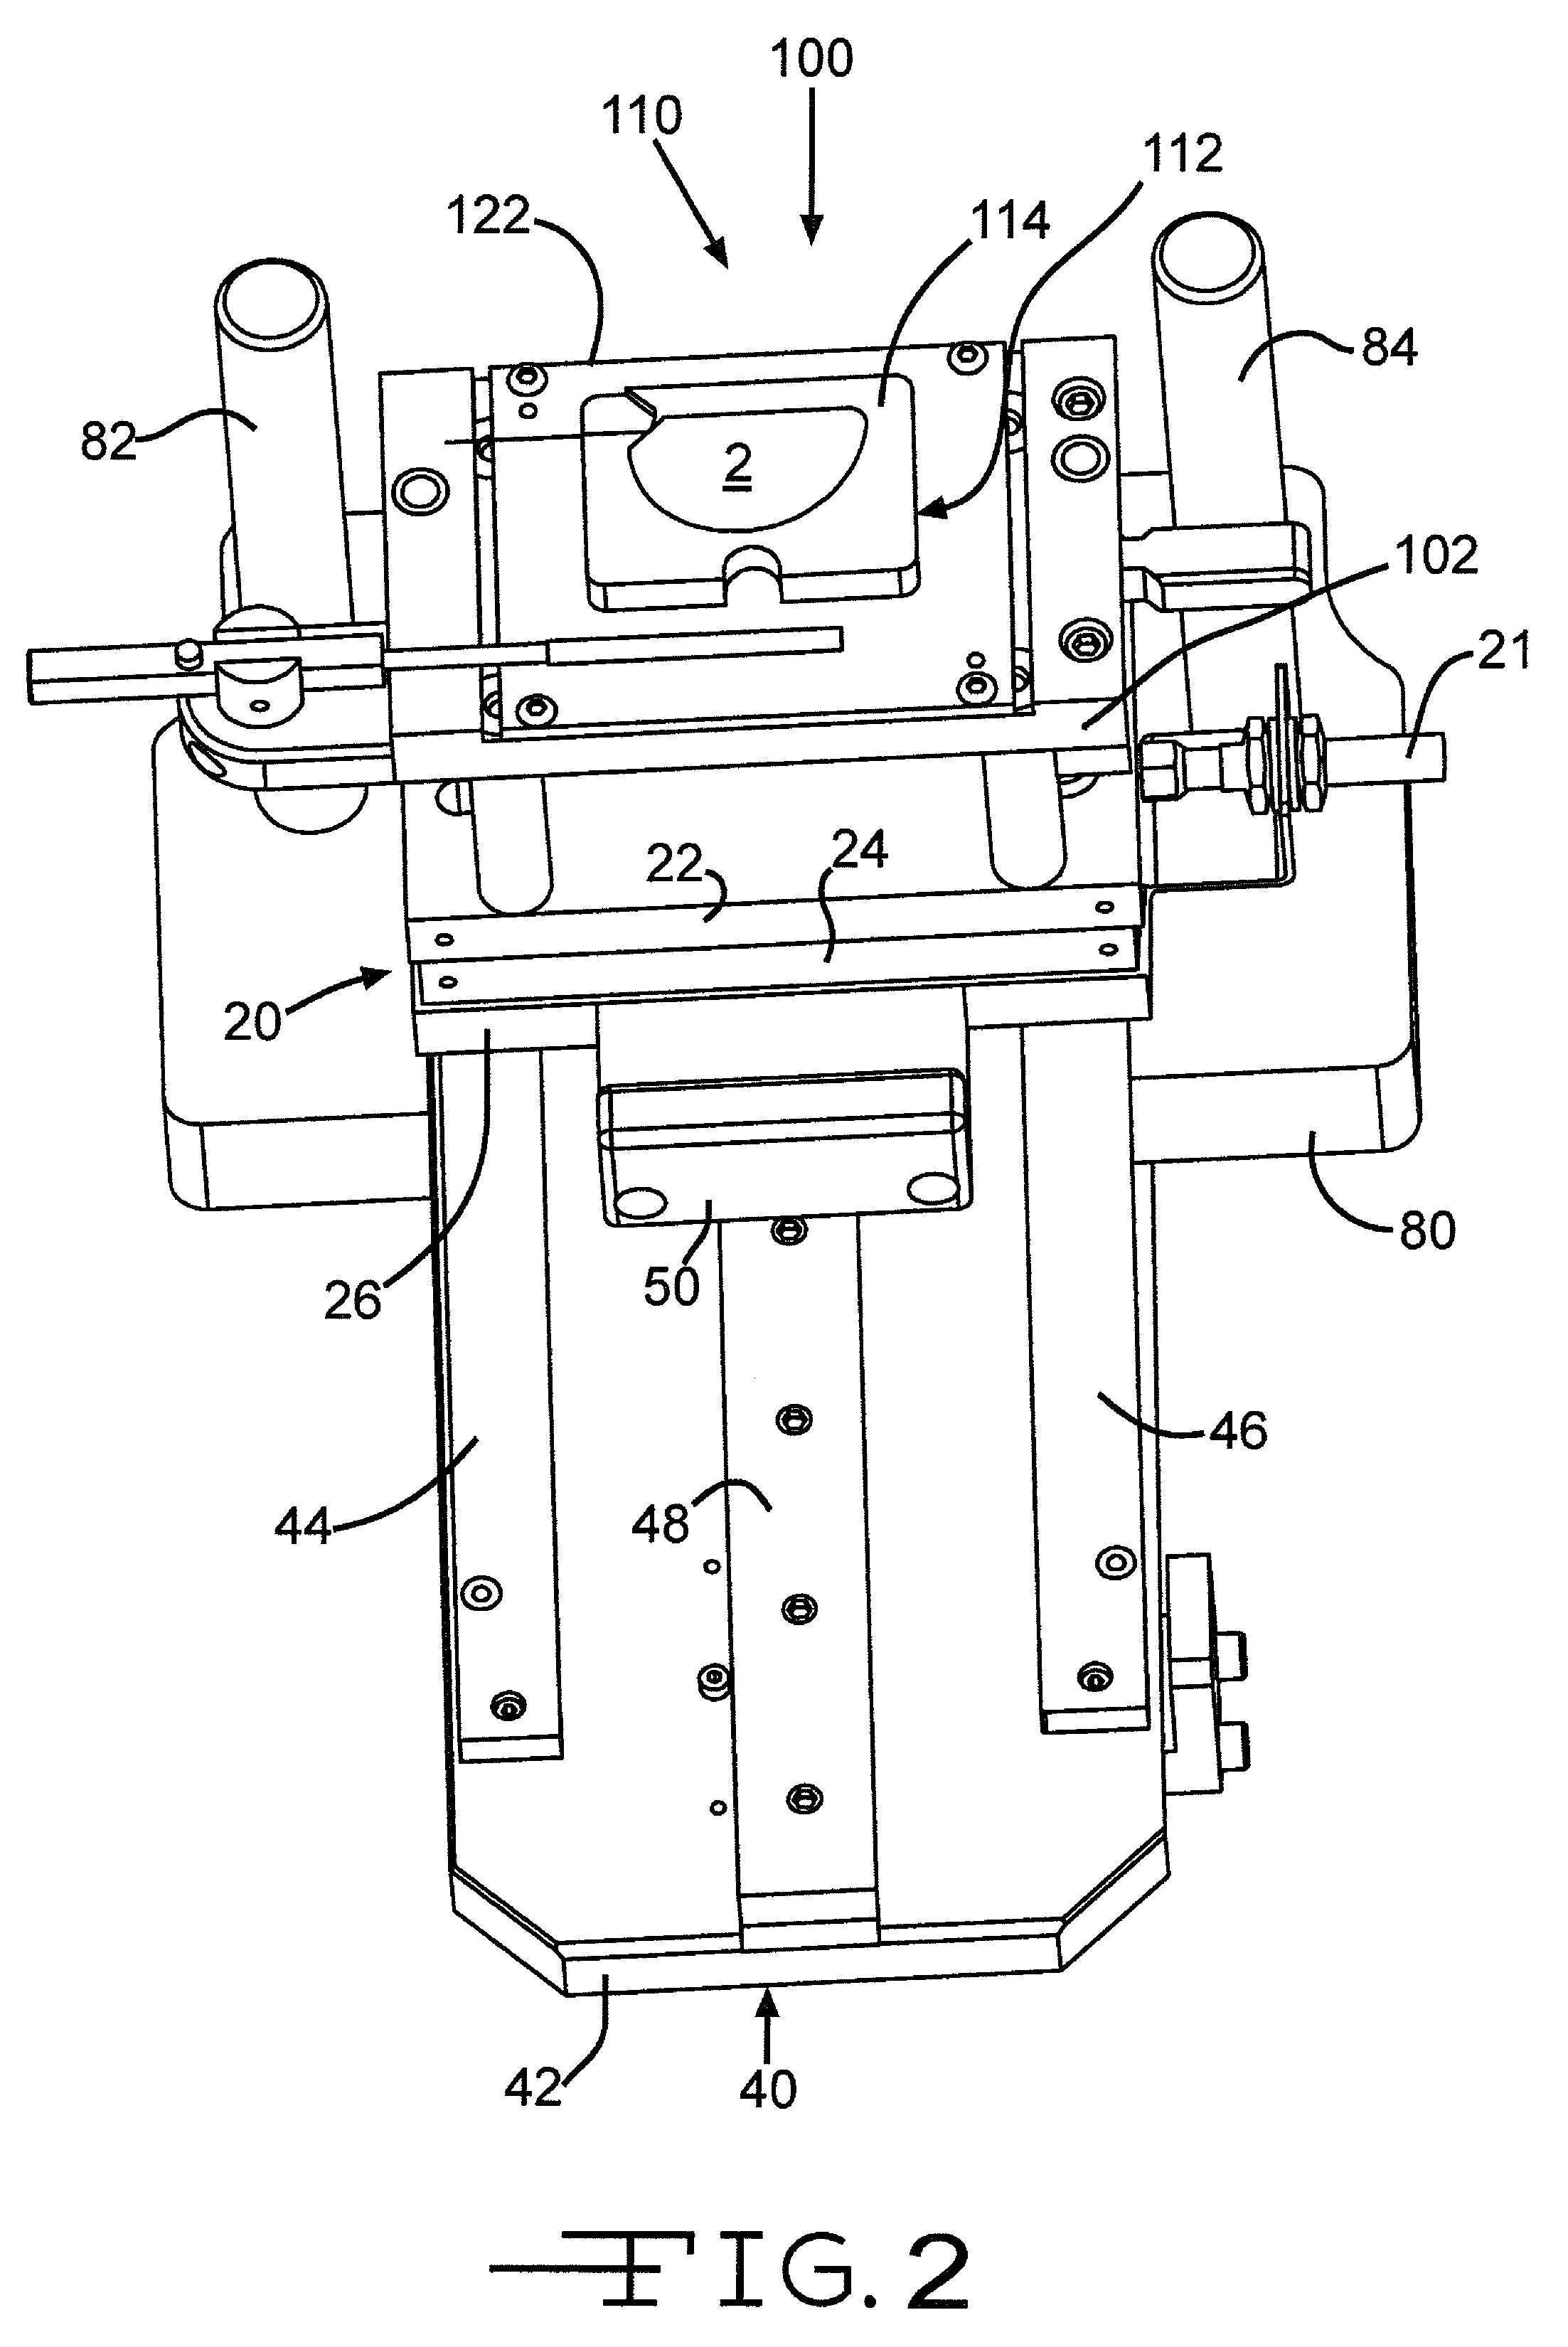 Thermo-encapsulating apparatus for providing a separator enveloping an electrode of an electrical energy storage device